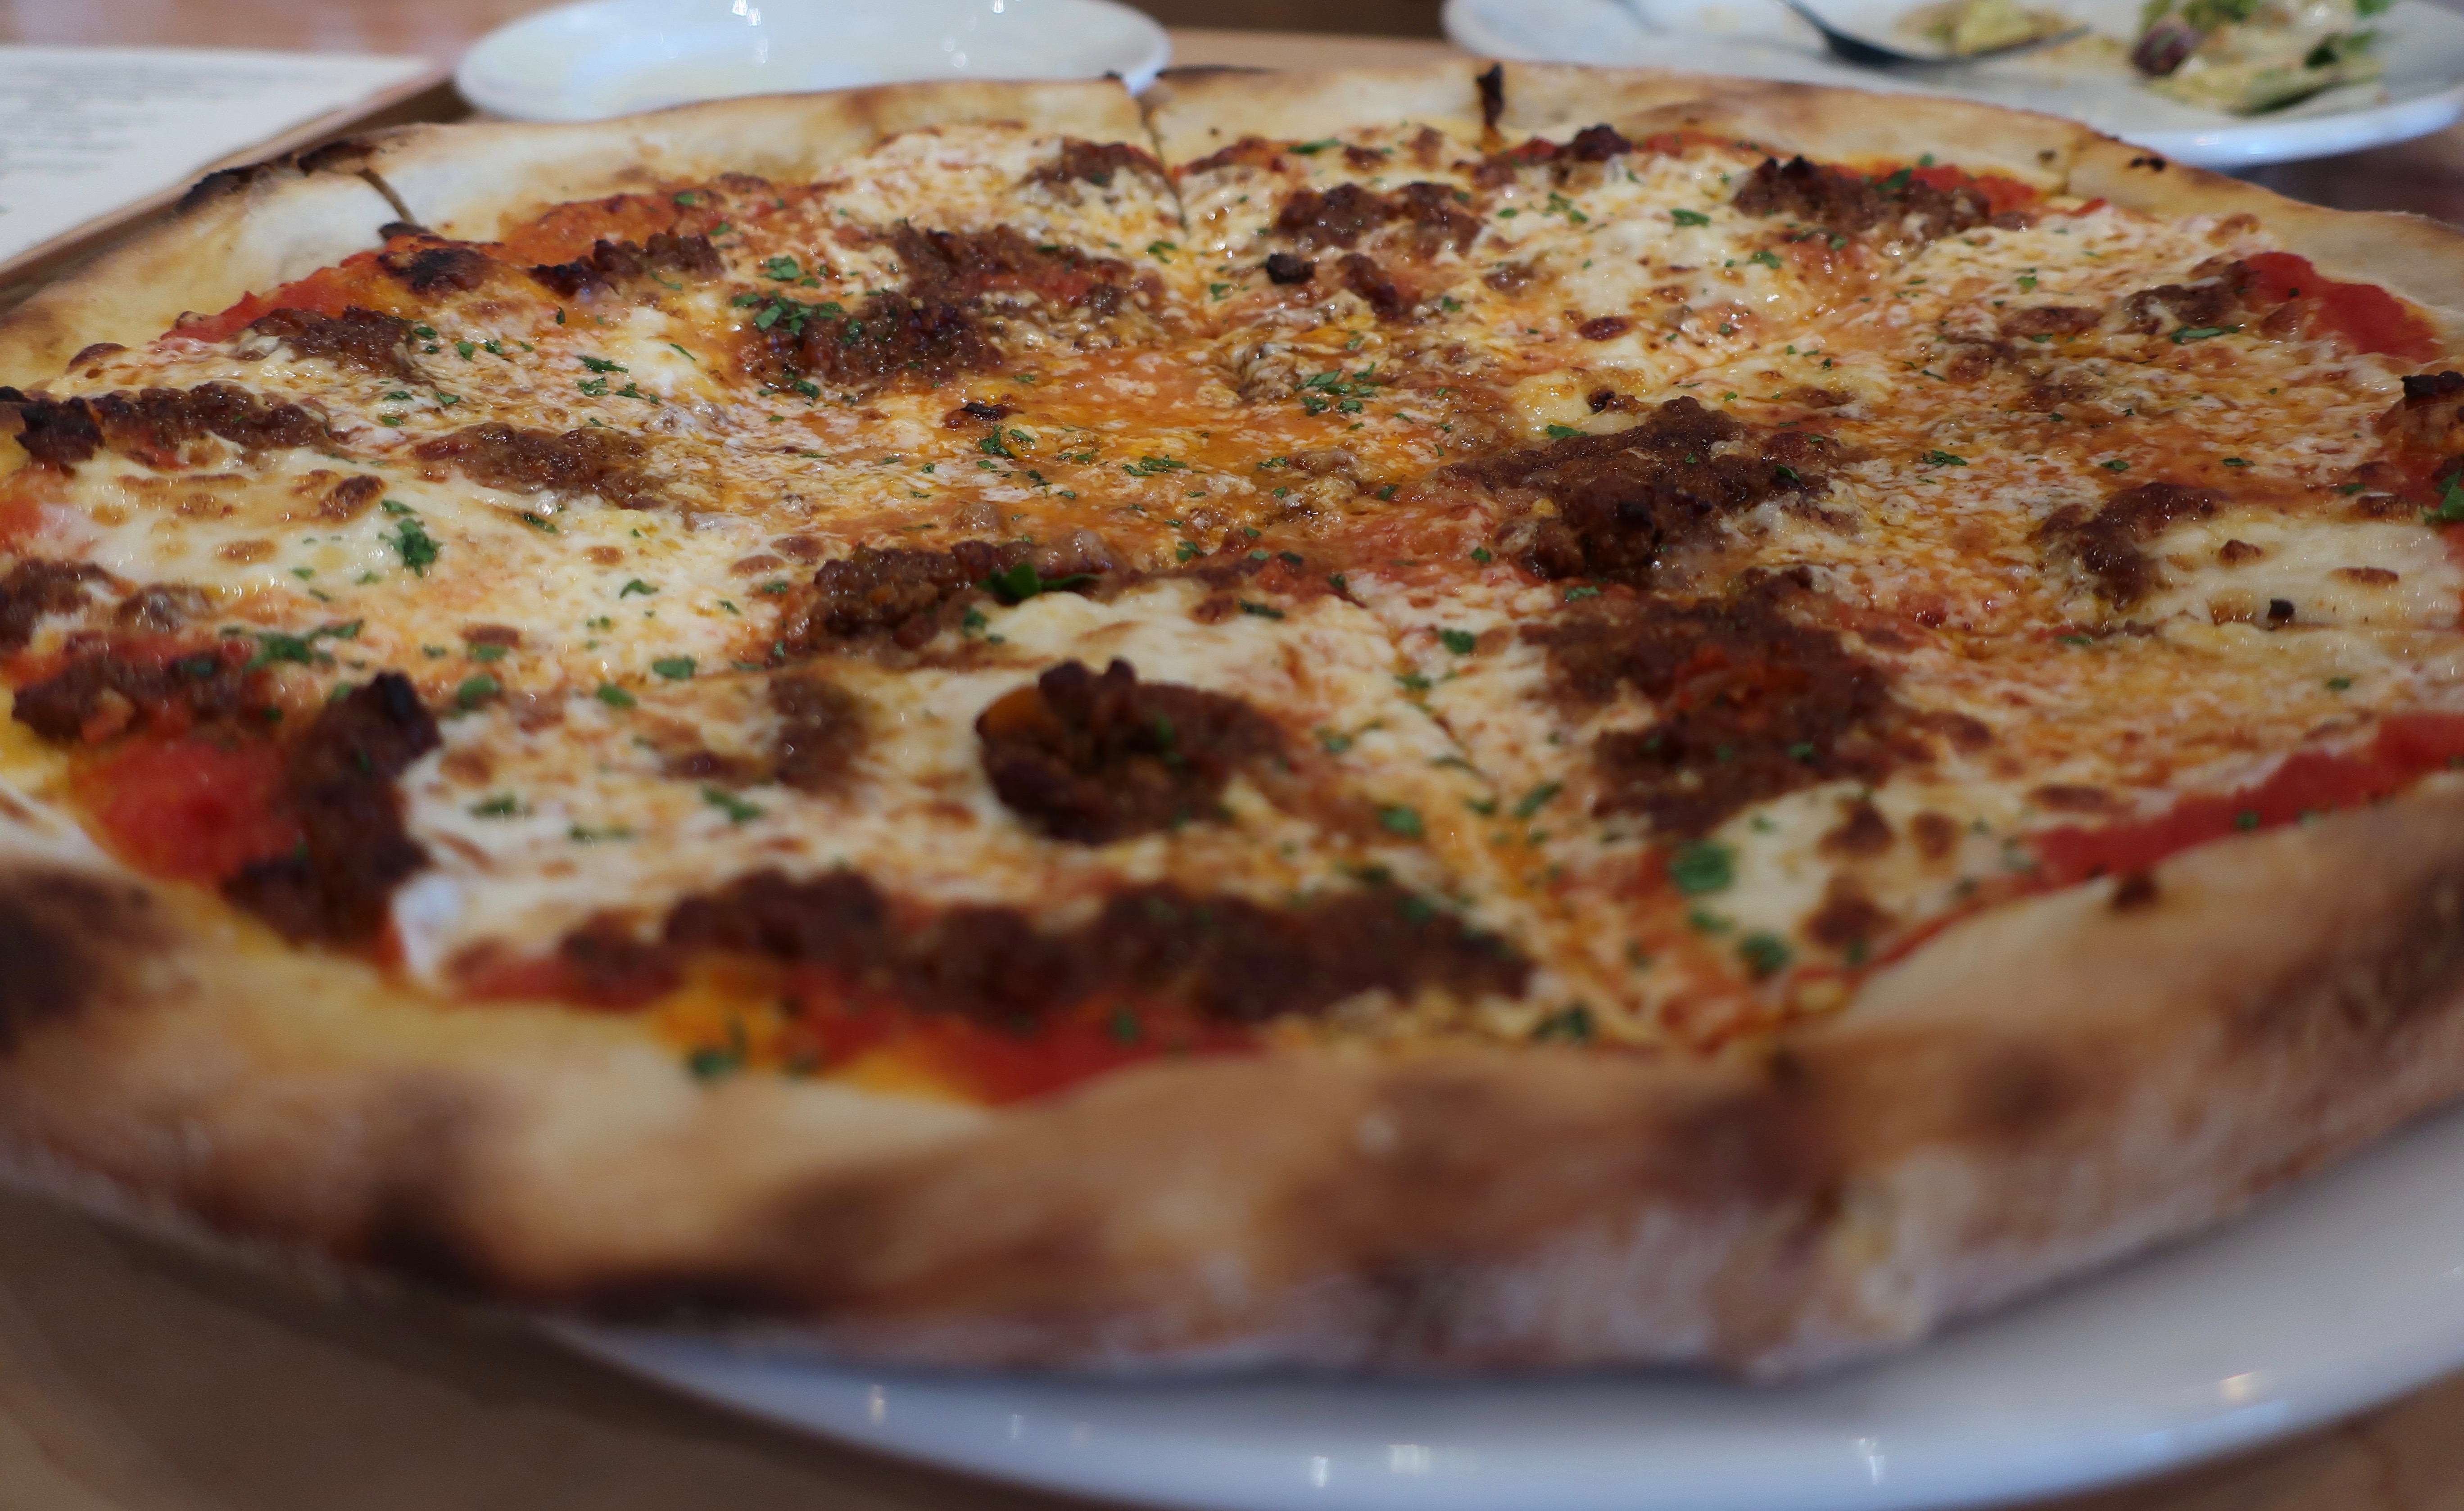 The Bolognese, one of Rally Pizza's delicious pizzas that features tomato sauce, smoky bechamel, slow-cooked beef and pork meat sauce, hand pulled mozzarella, Parmigiano-Reggiano.